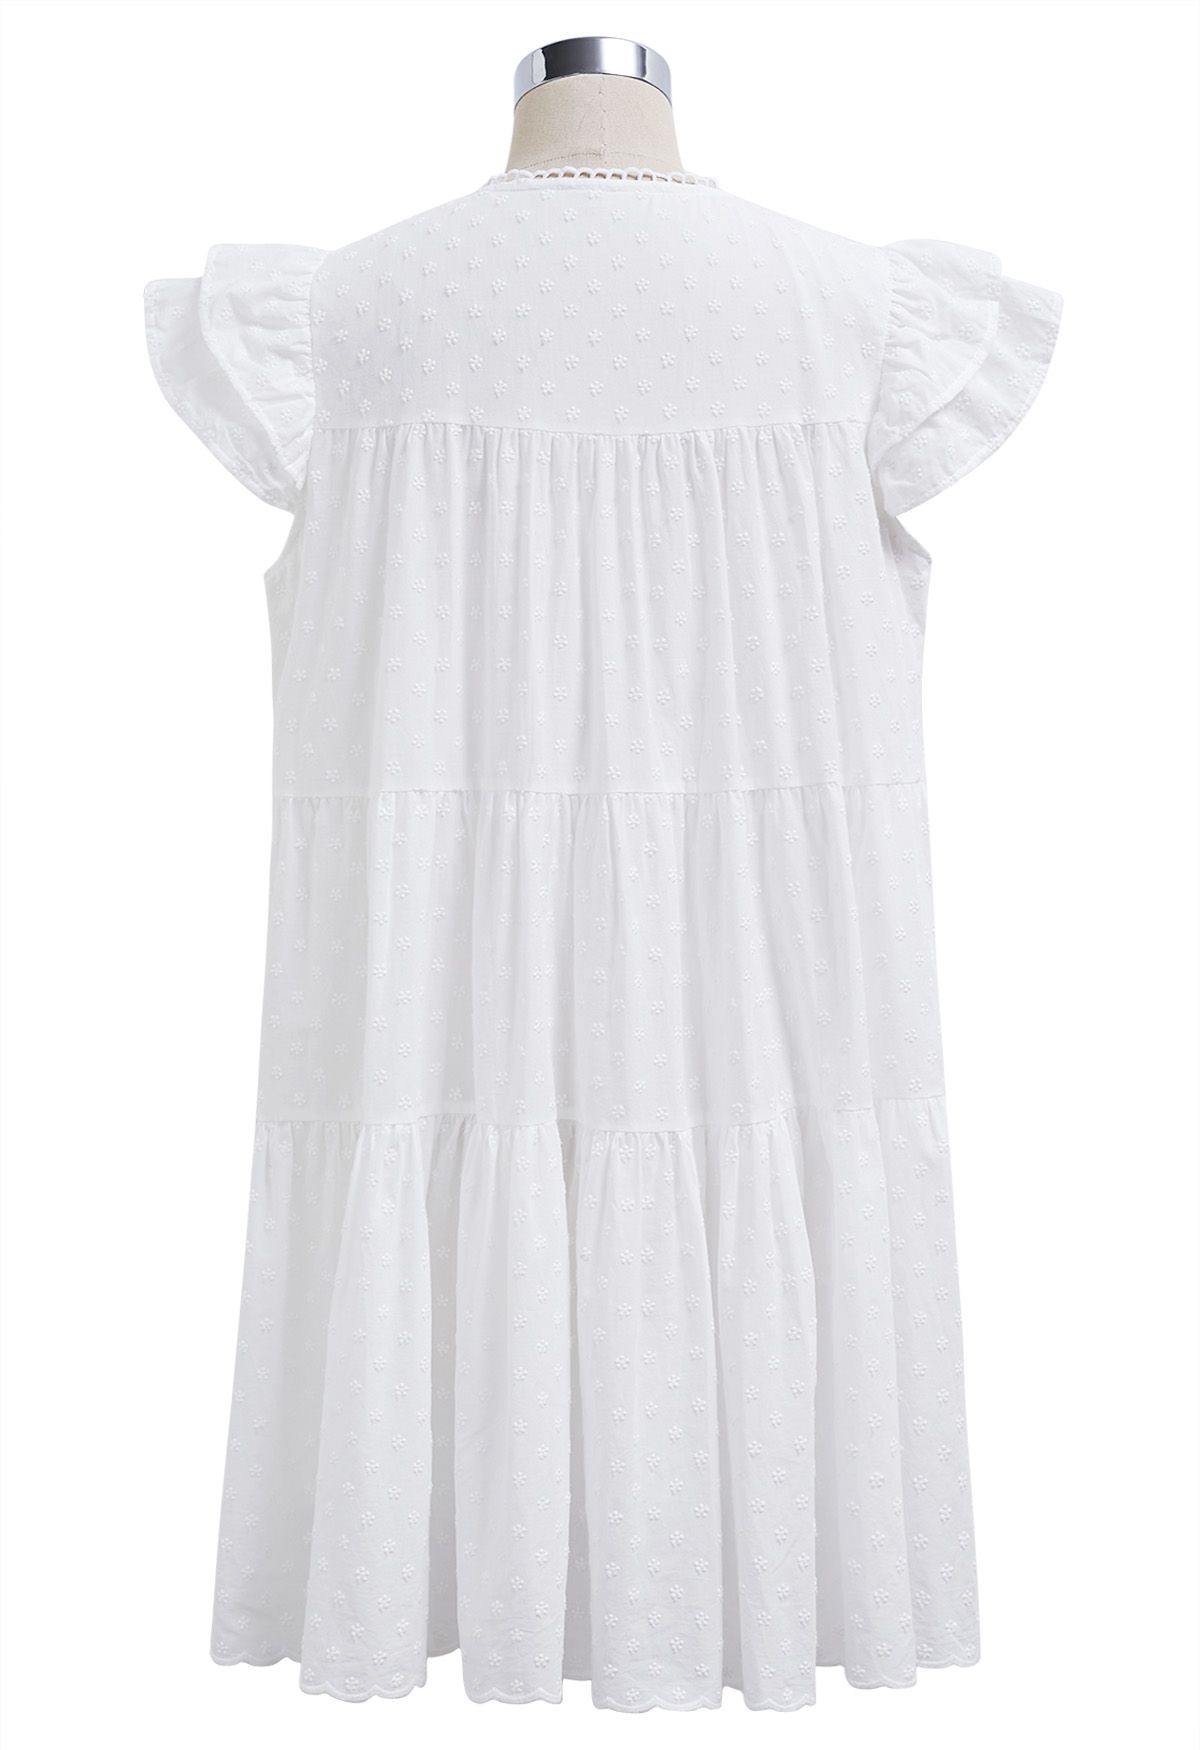 Lovely Floret Embroidered Dolly Mini Dress in White